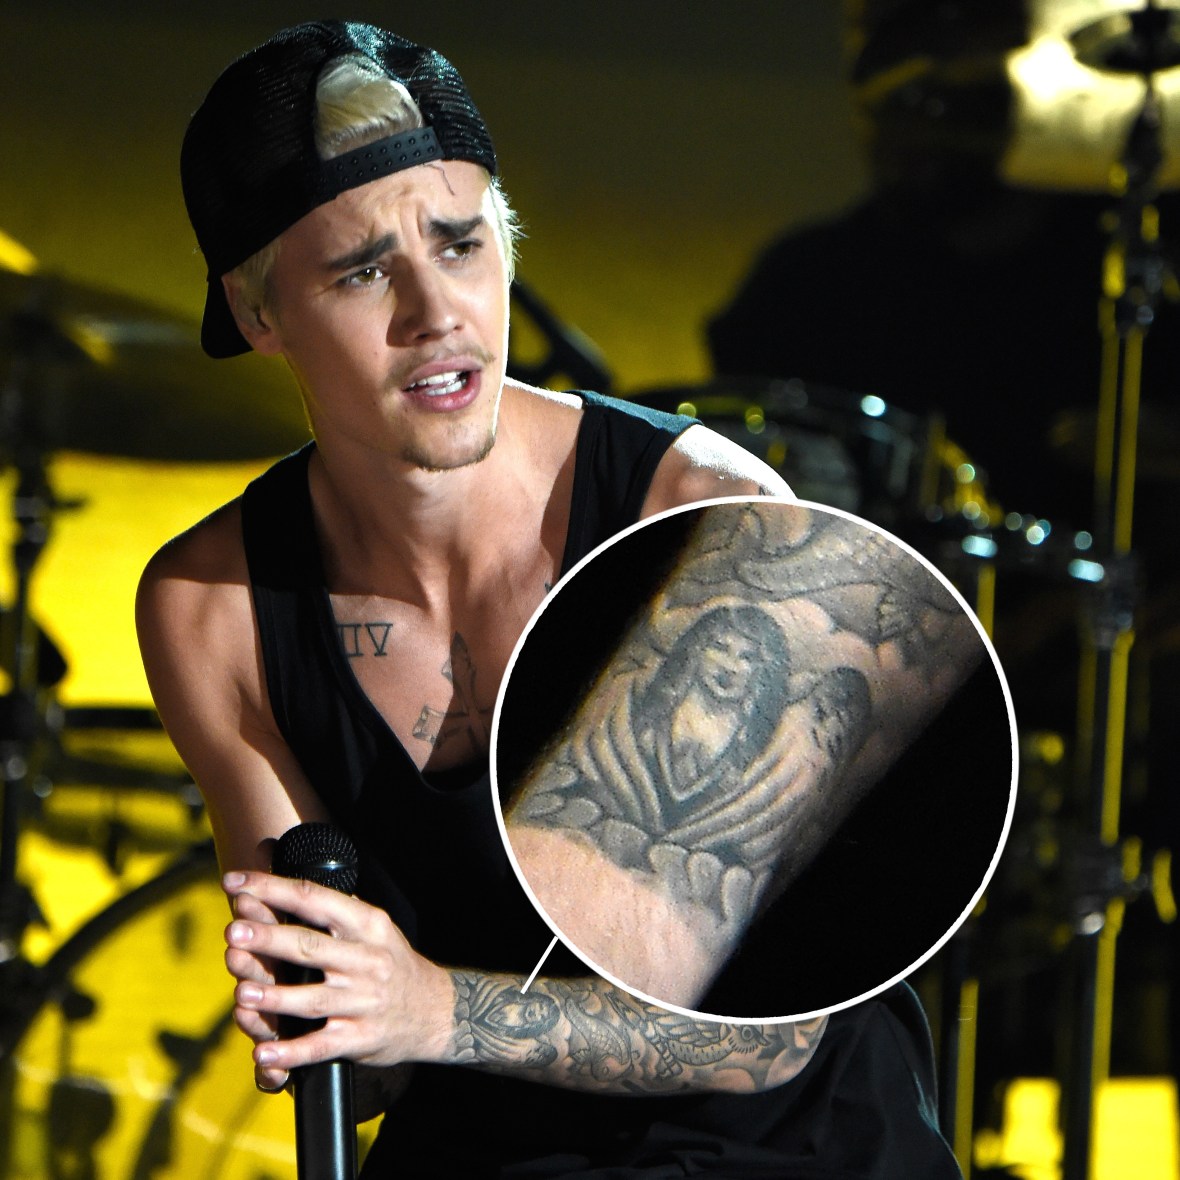 Justin Bieber Tried to Cover Up His Tattoo of Selena Gomez But Failed